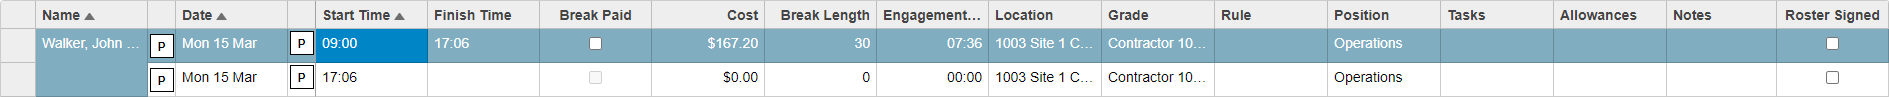 Figure #31: Split Shifts (2 x Engagements, 2 x separate Shifts for one Day)